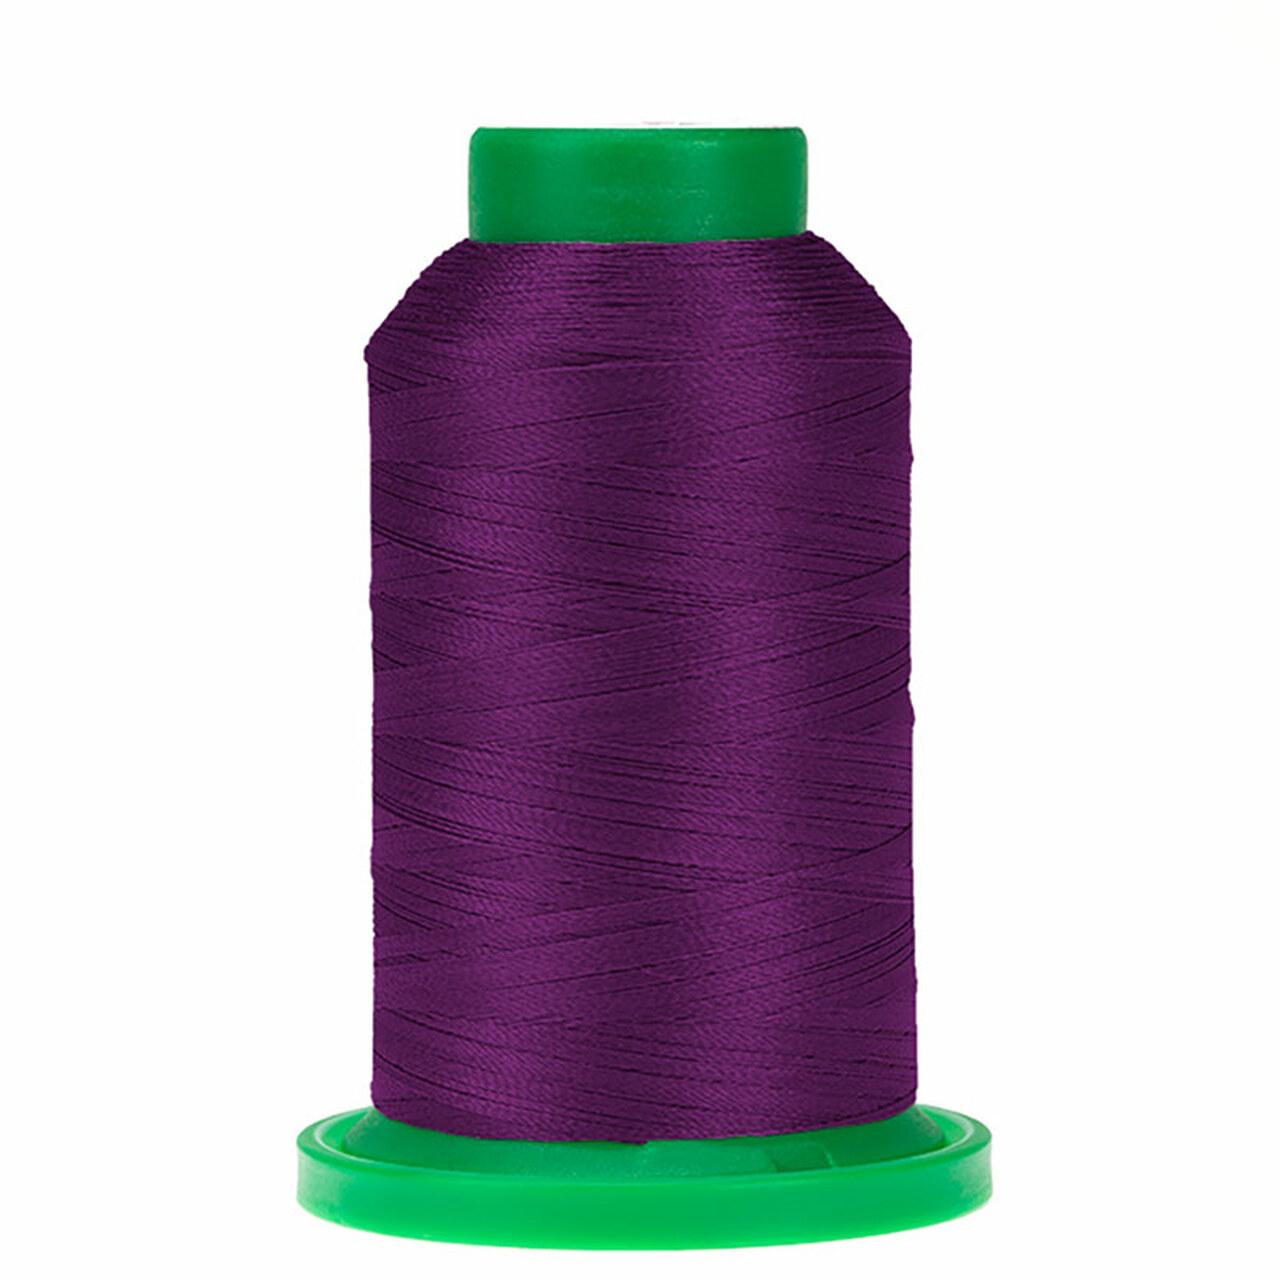 Thread - Isacord - Orchid - 2922-2810